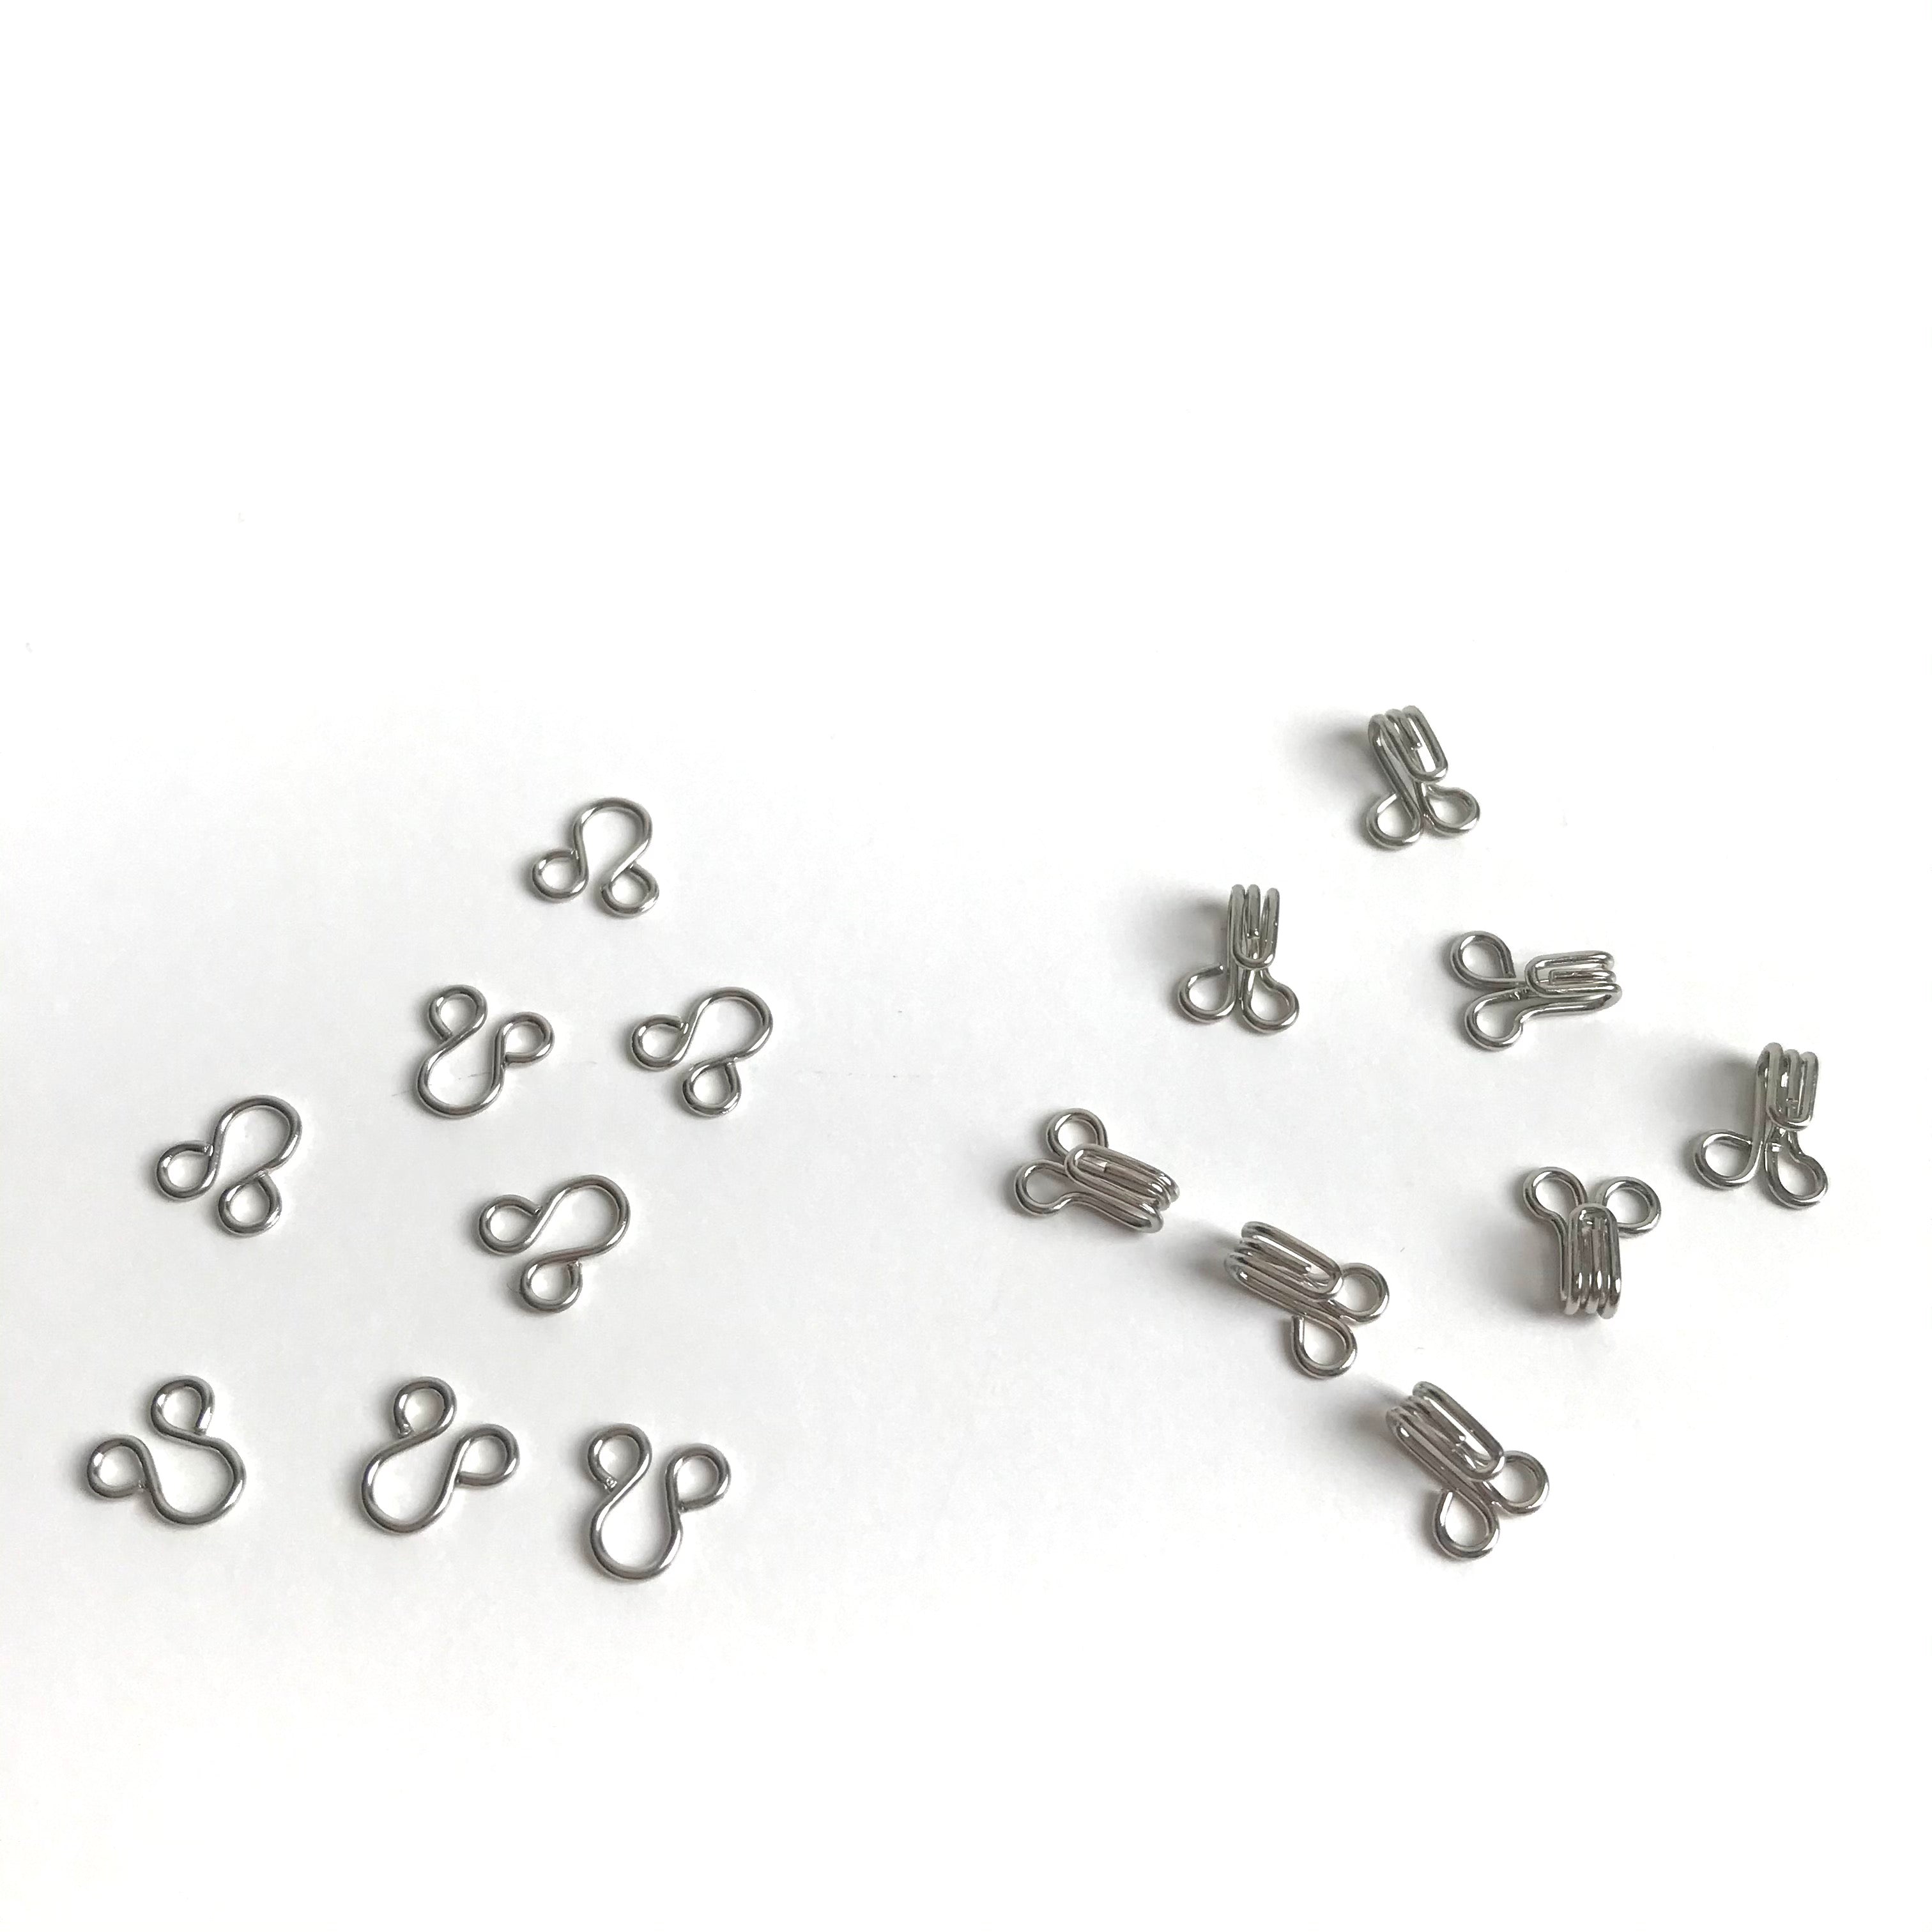 Bra Hooks and Eyes Clothing Sewing 8mm 10mm Pack of 36 Sets Silver